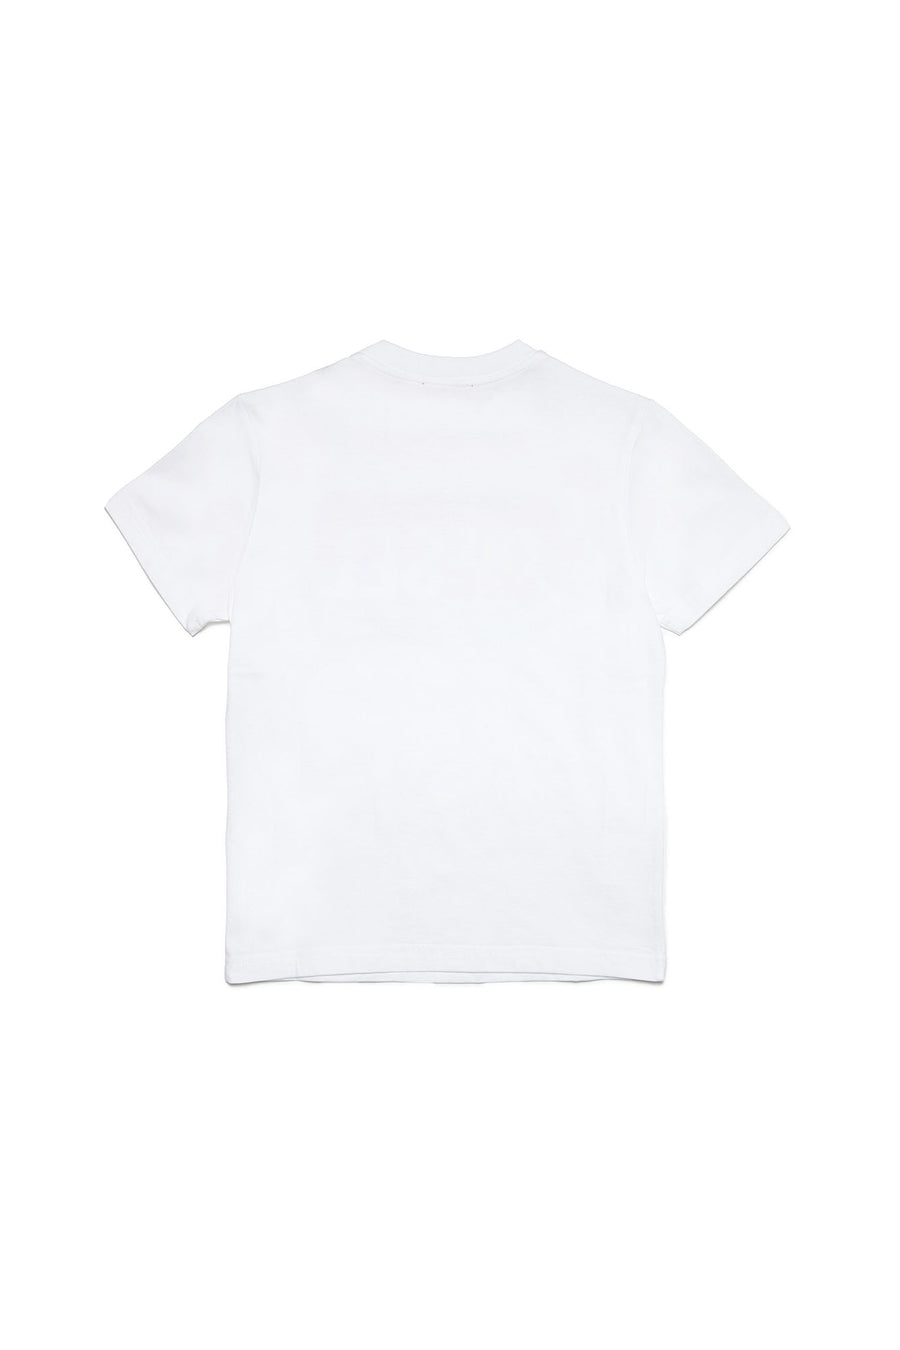 Colored print white t-shirt by Diesel